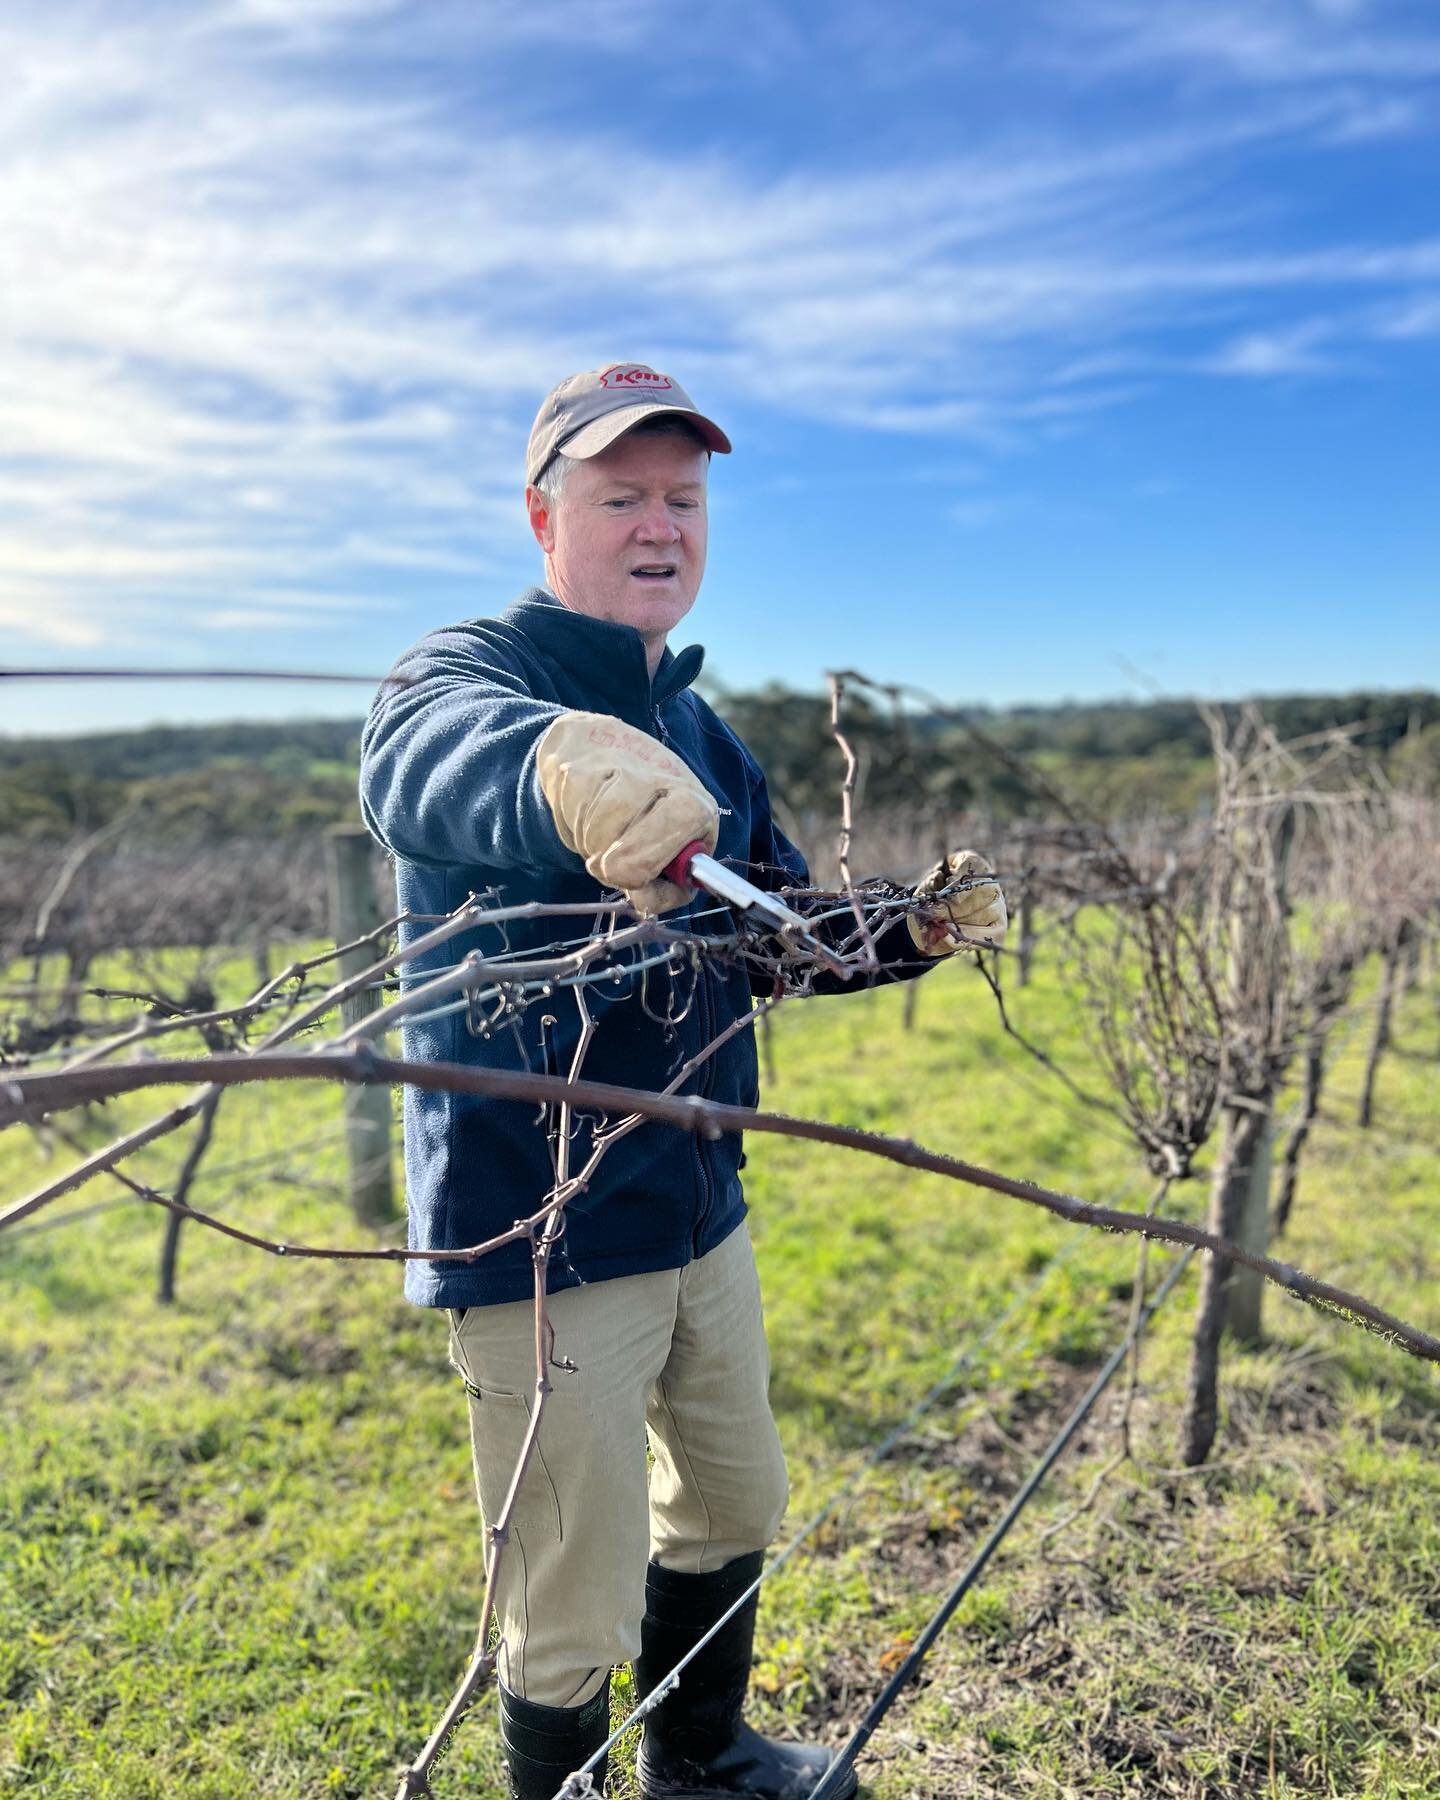 Our pruning is complete 🍷 We&rsquo;re quite meticulous about this as it sets each vine up for the rest of the season. After an initial haircut by the barrel pruner, which literally barrels through the vineyard leaving the plants a little frazzled, w